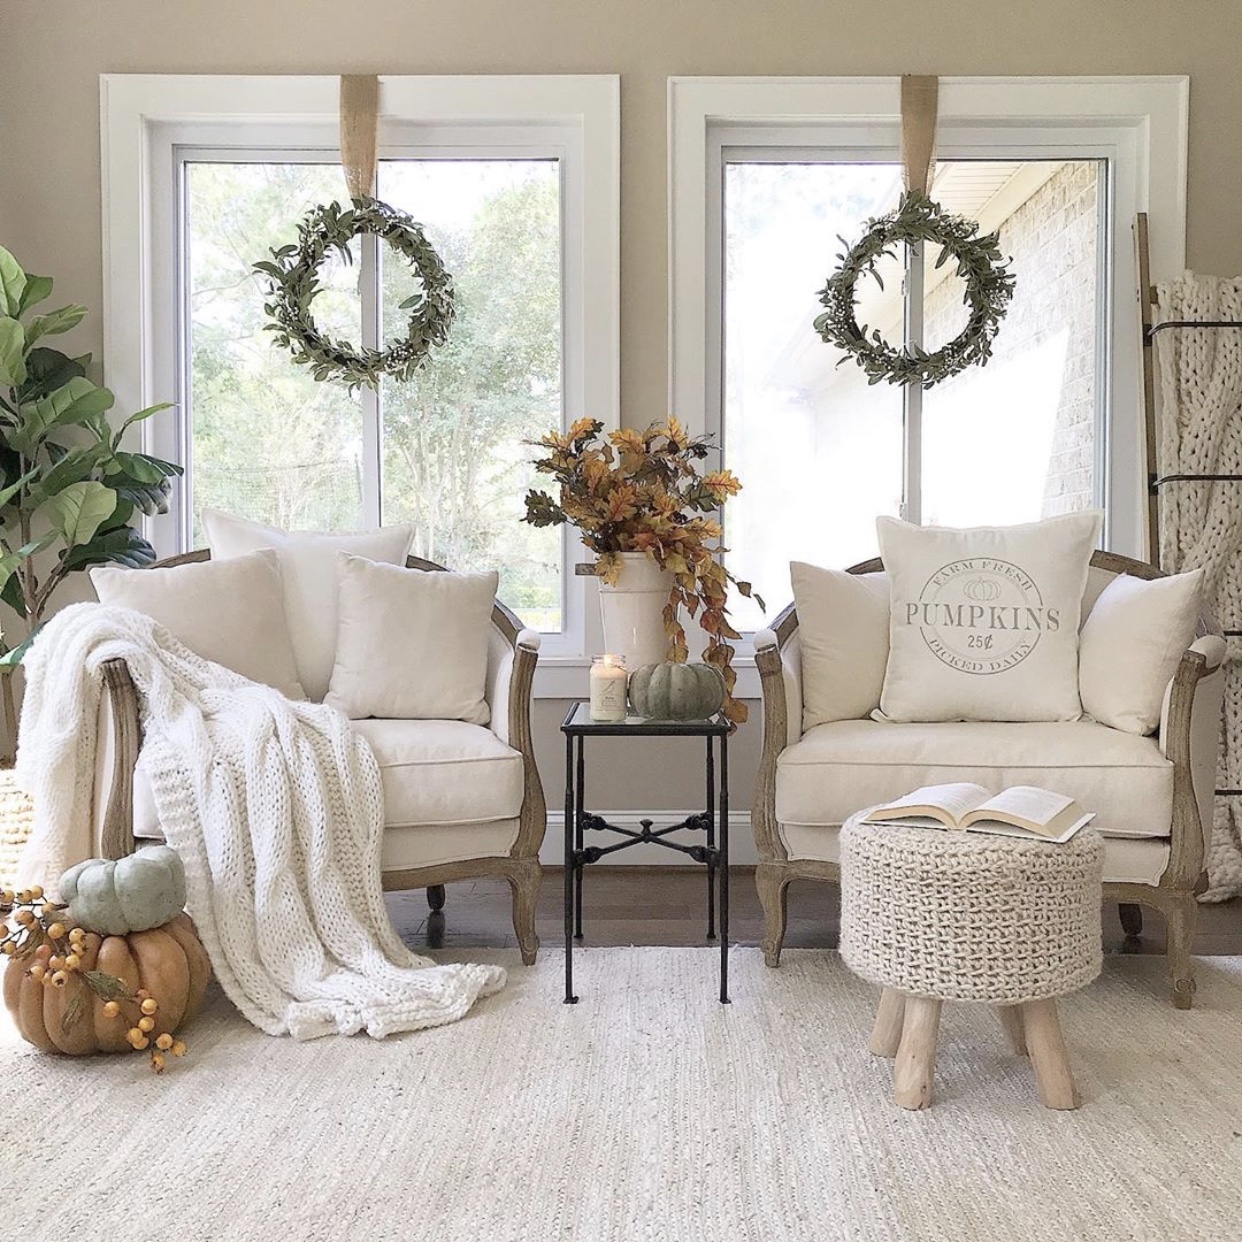 Two chairs in front of two windows with fall decor and a chunky knit neutral throw blanket draped over the arm of a chair.